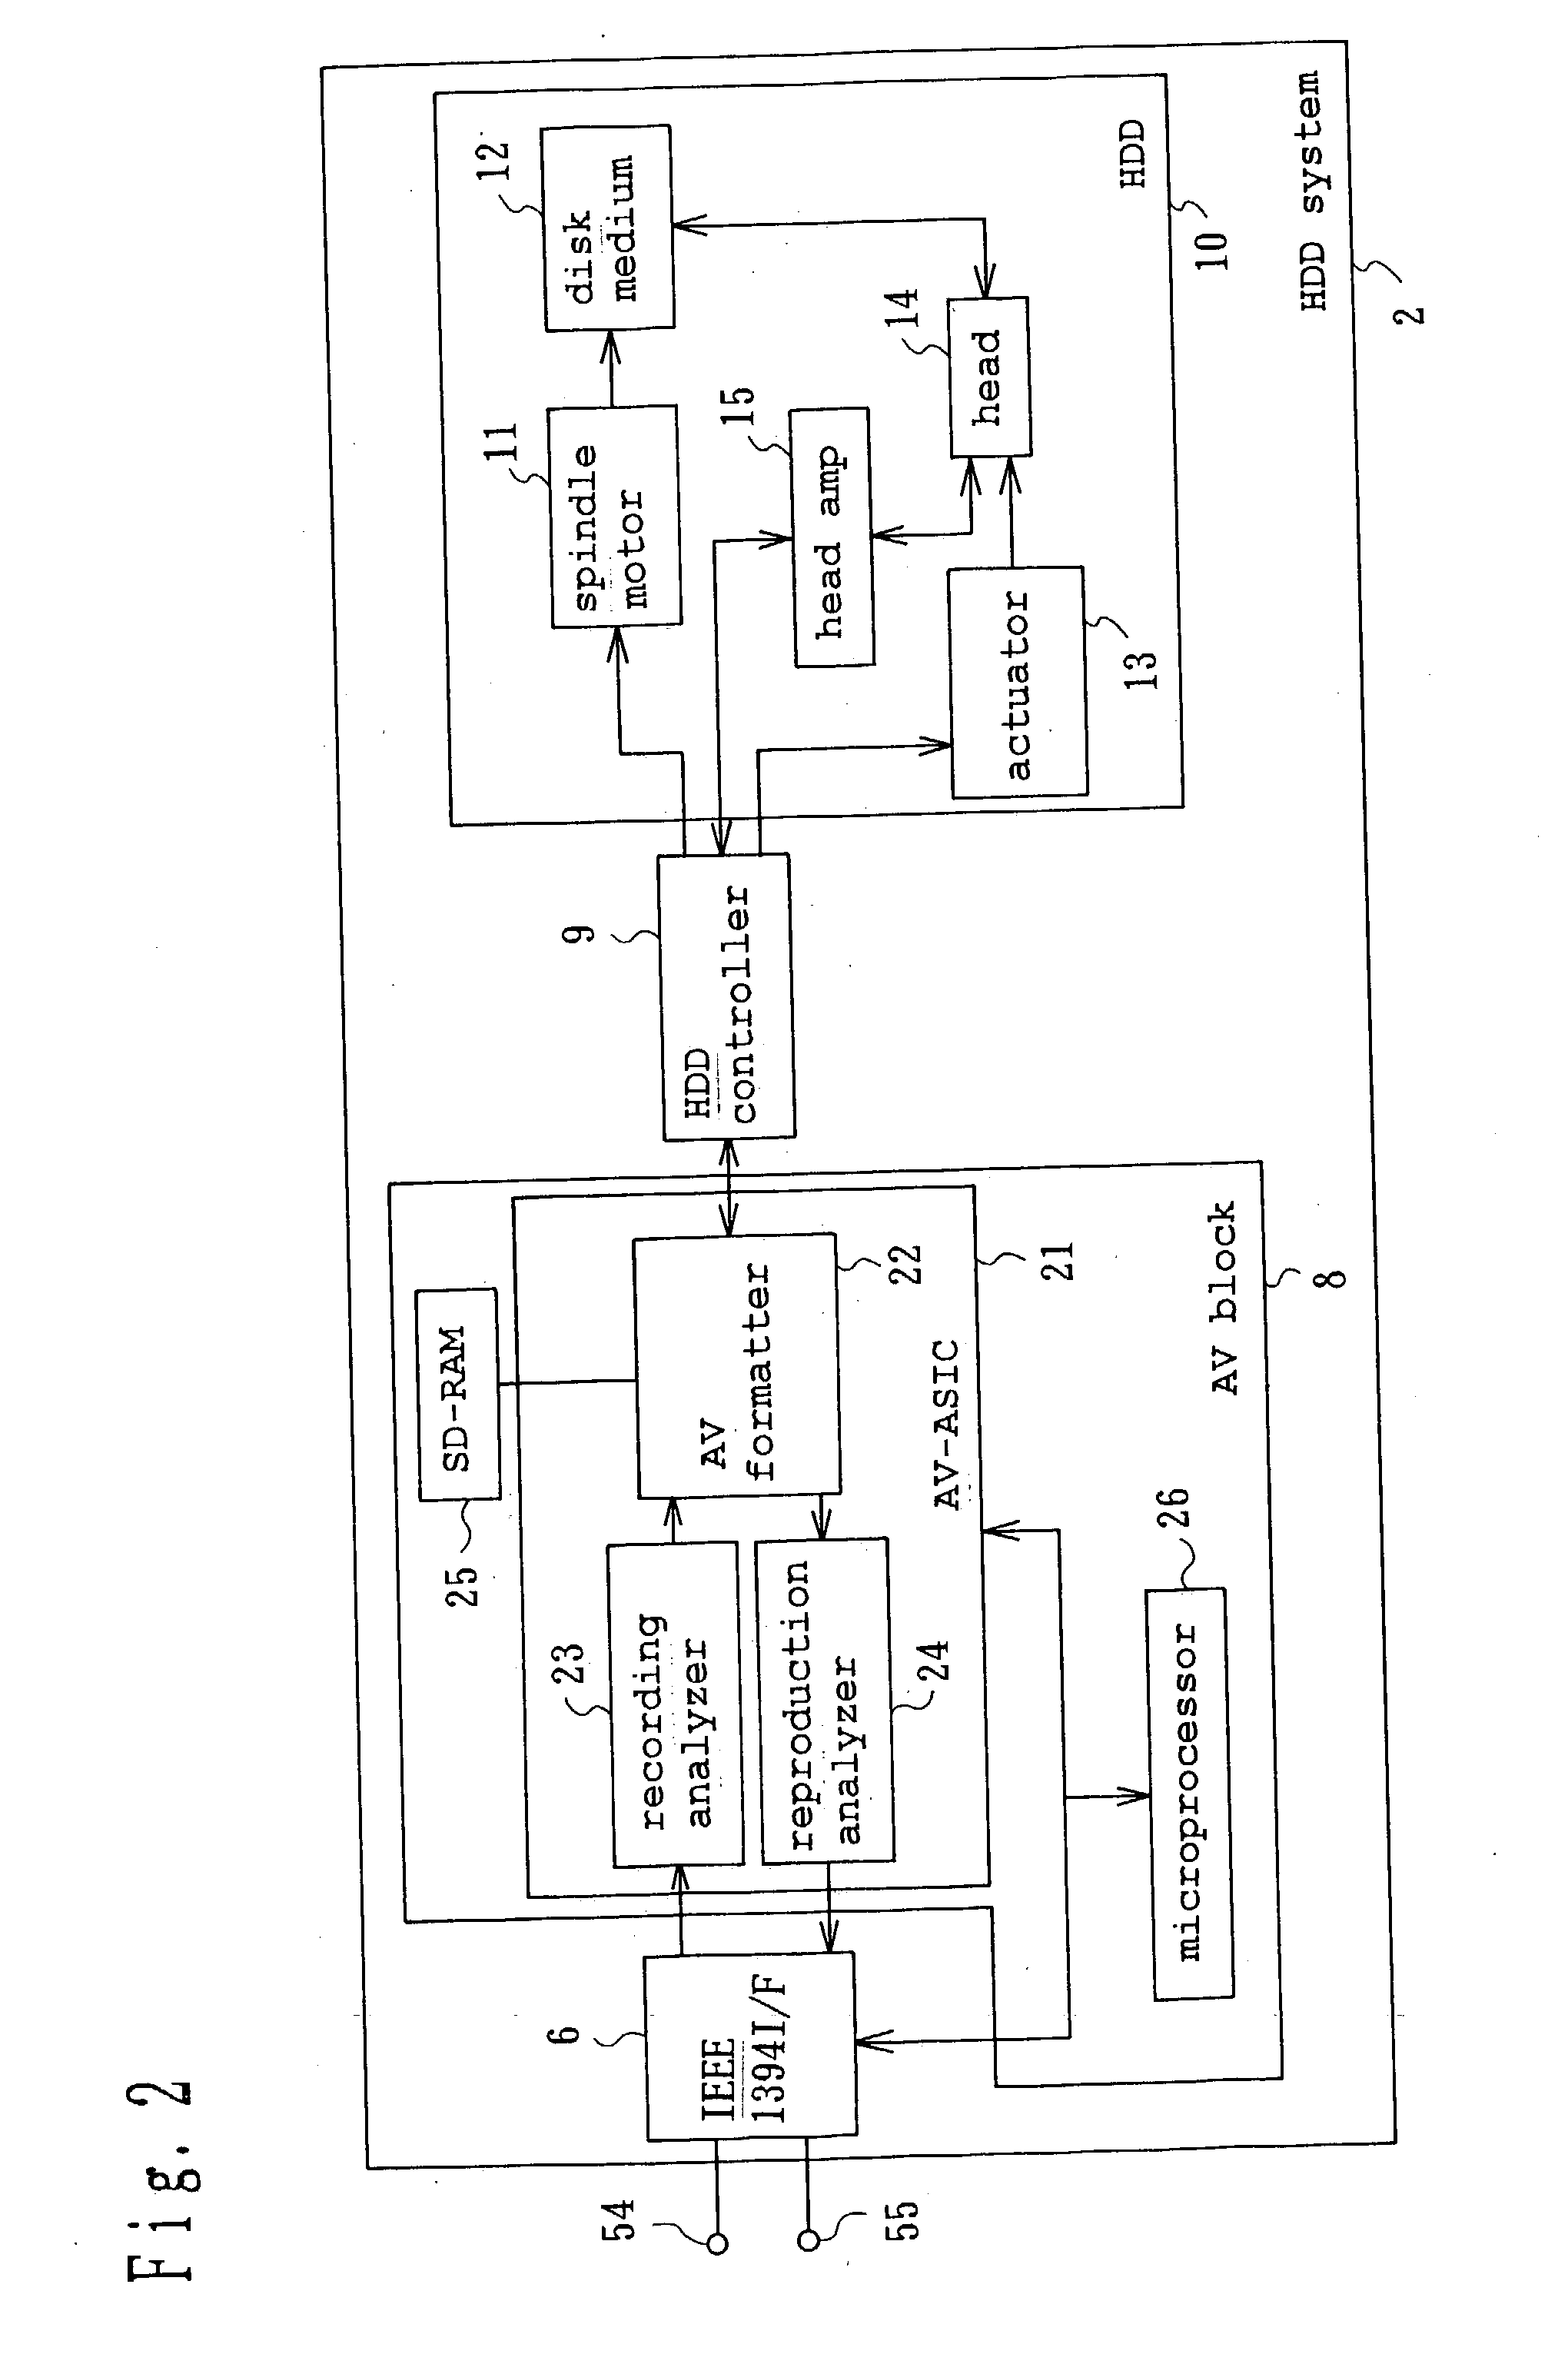 Recording format, recording device and reproducing device